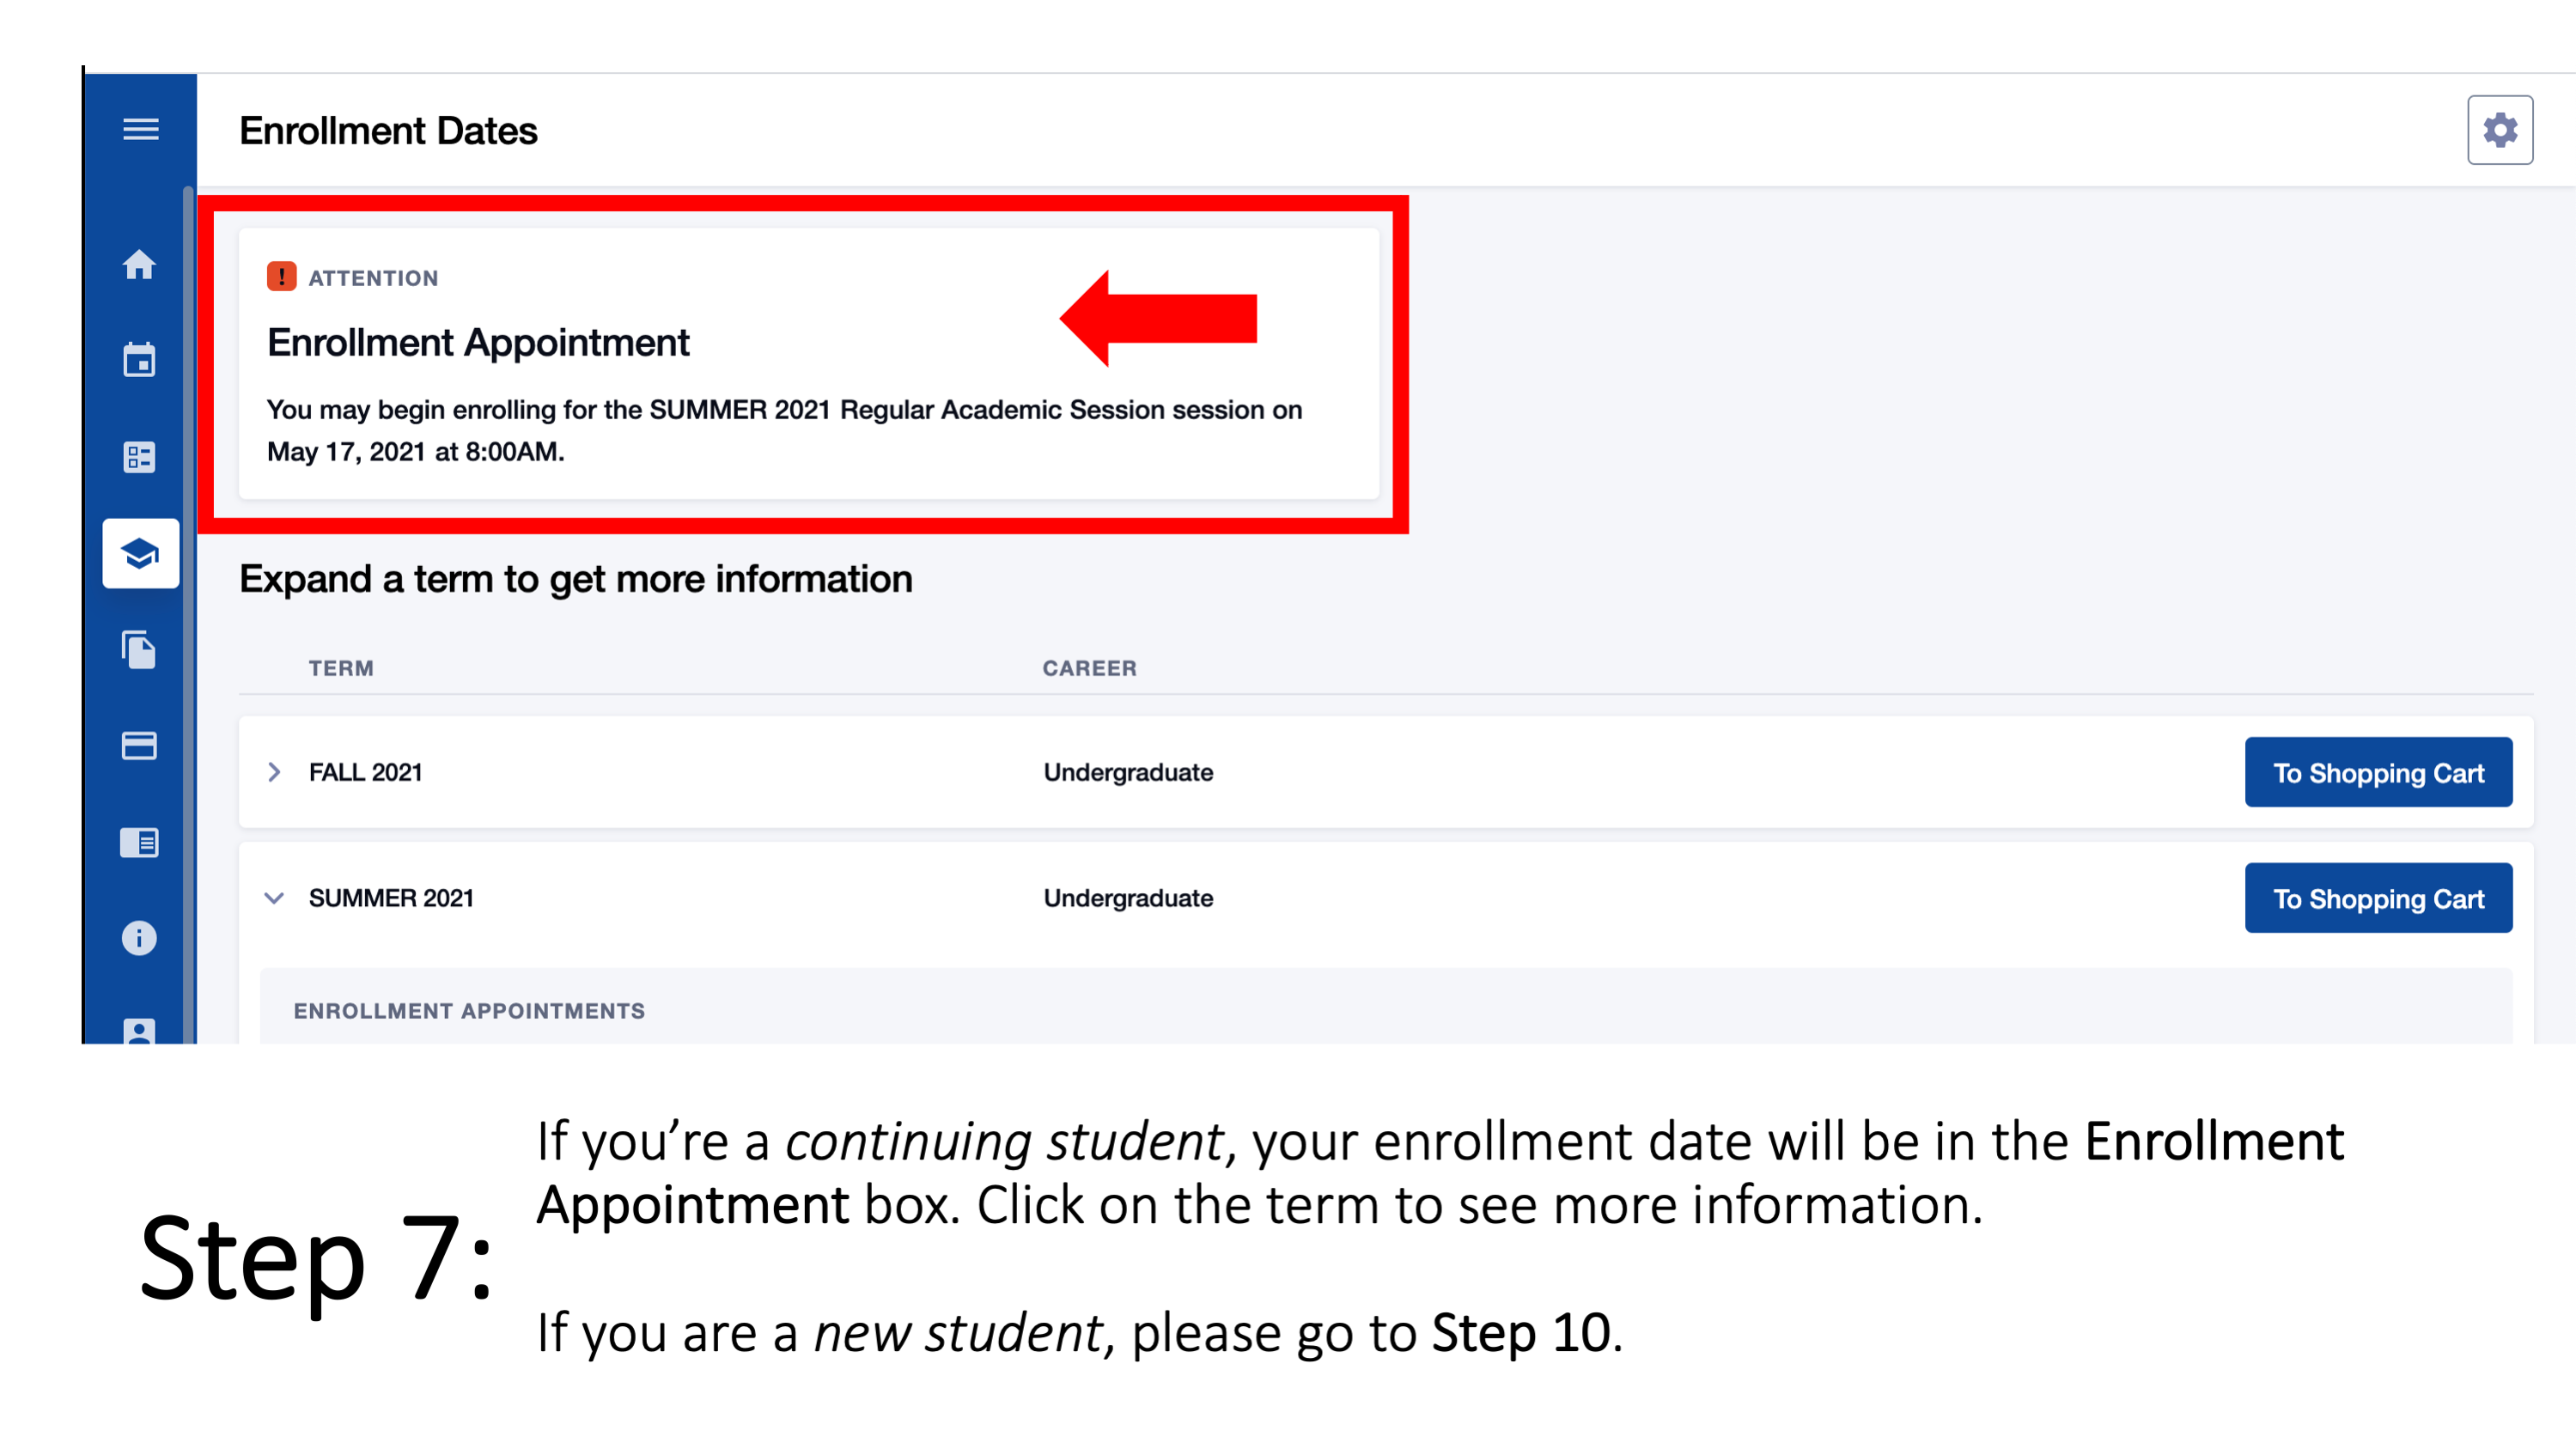 Step 7: If you’re a continuing student, your enrollment date will be in the Enrollment Appointment box. Click on the term to see more information. If you are a new student, please go to Step 10.